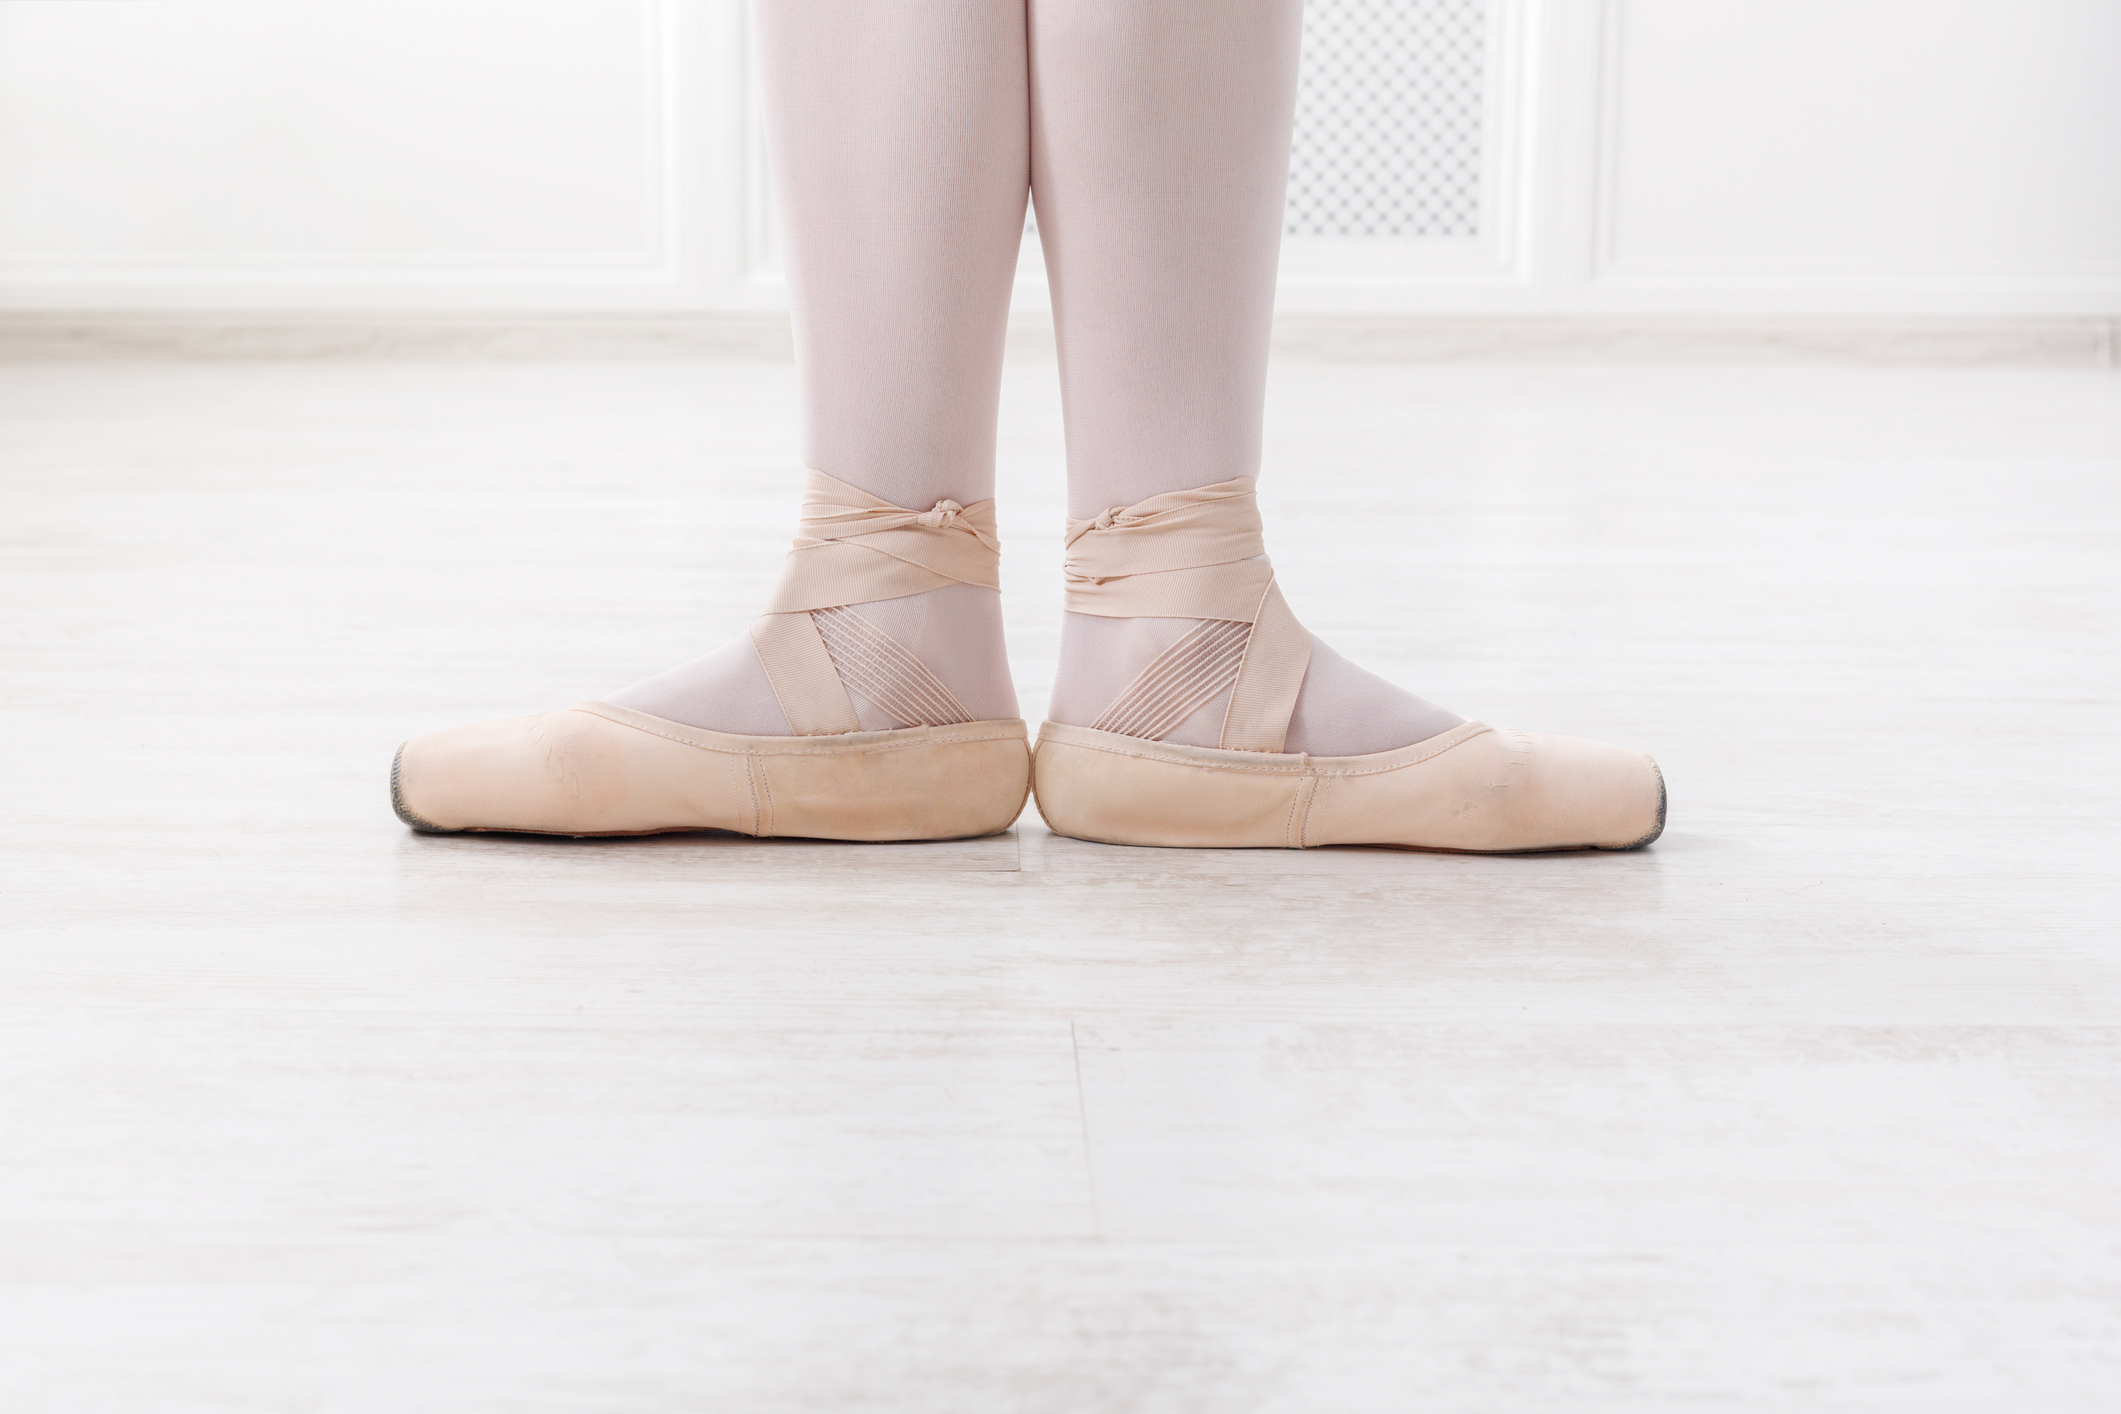 A ballerina is shown from the calves down in first position. She wears pink tights and pink pointe shoes and stands on a white floor in front of white walls.